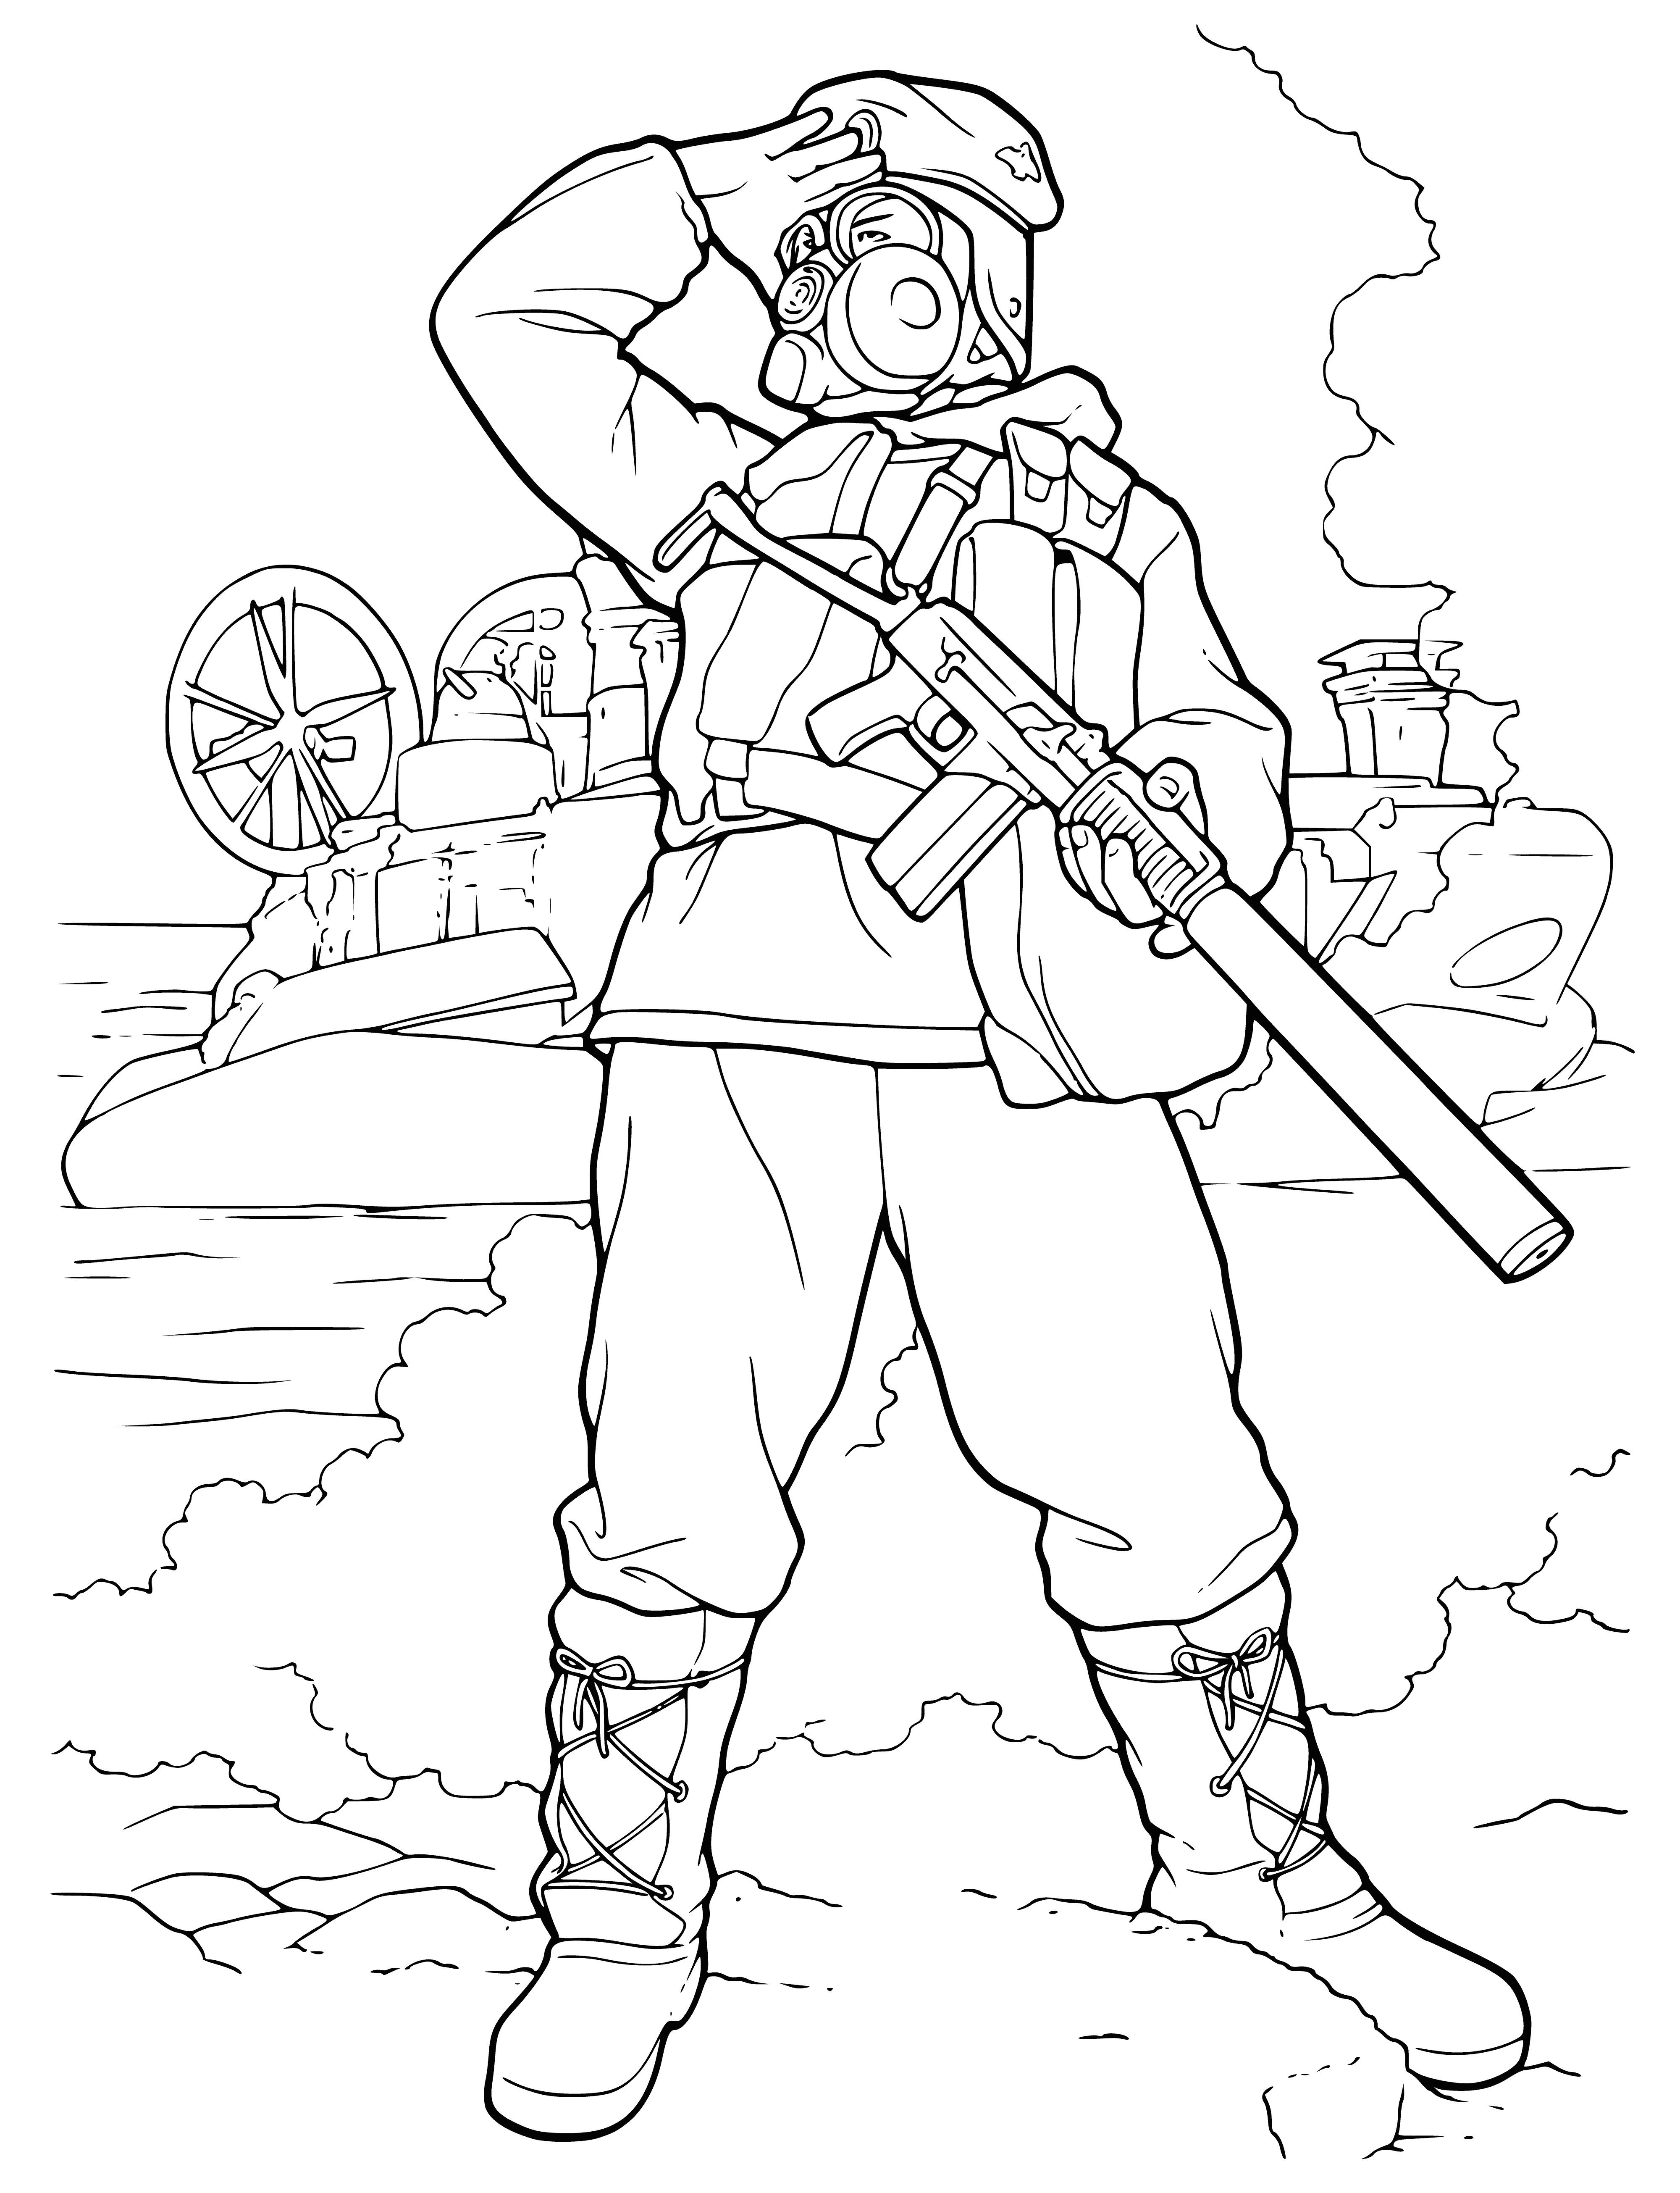 coloring page: The Army is a military land force responsible for defending on land w/ infantry, tanks & artillery.